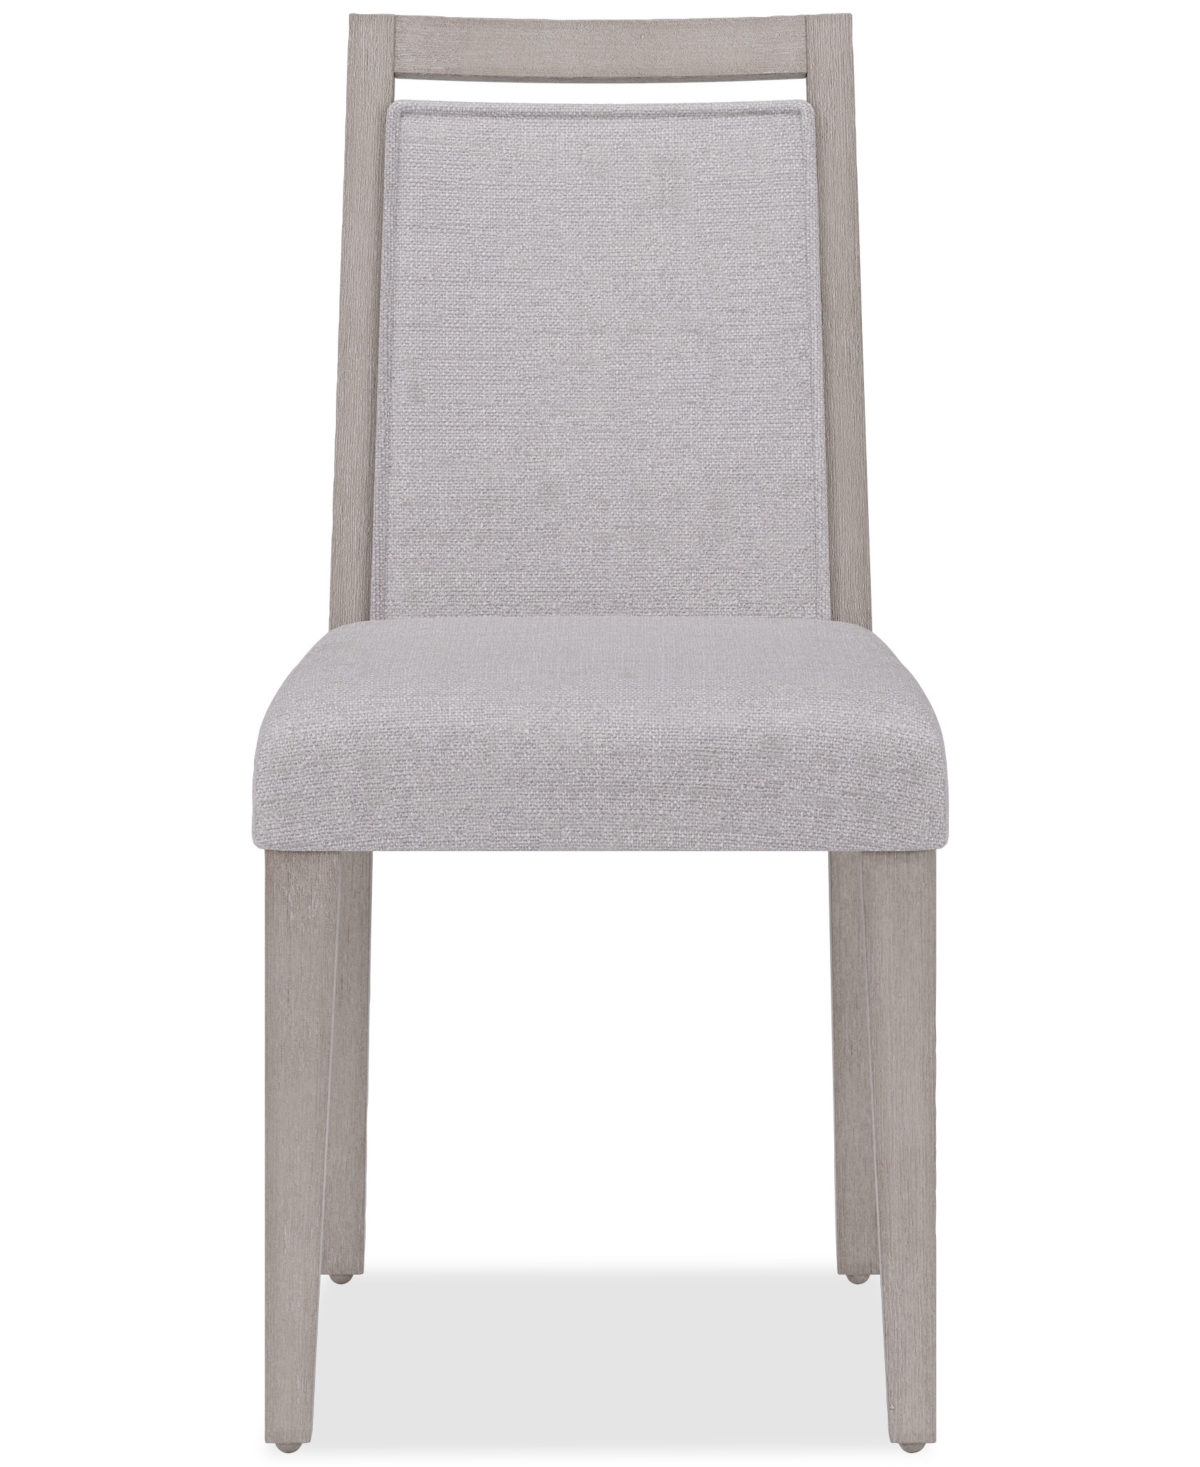 Macy's Tivie 6 Pc Wood Dining Chair Set In Grey